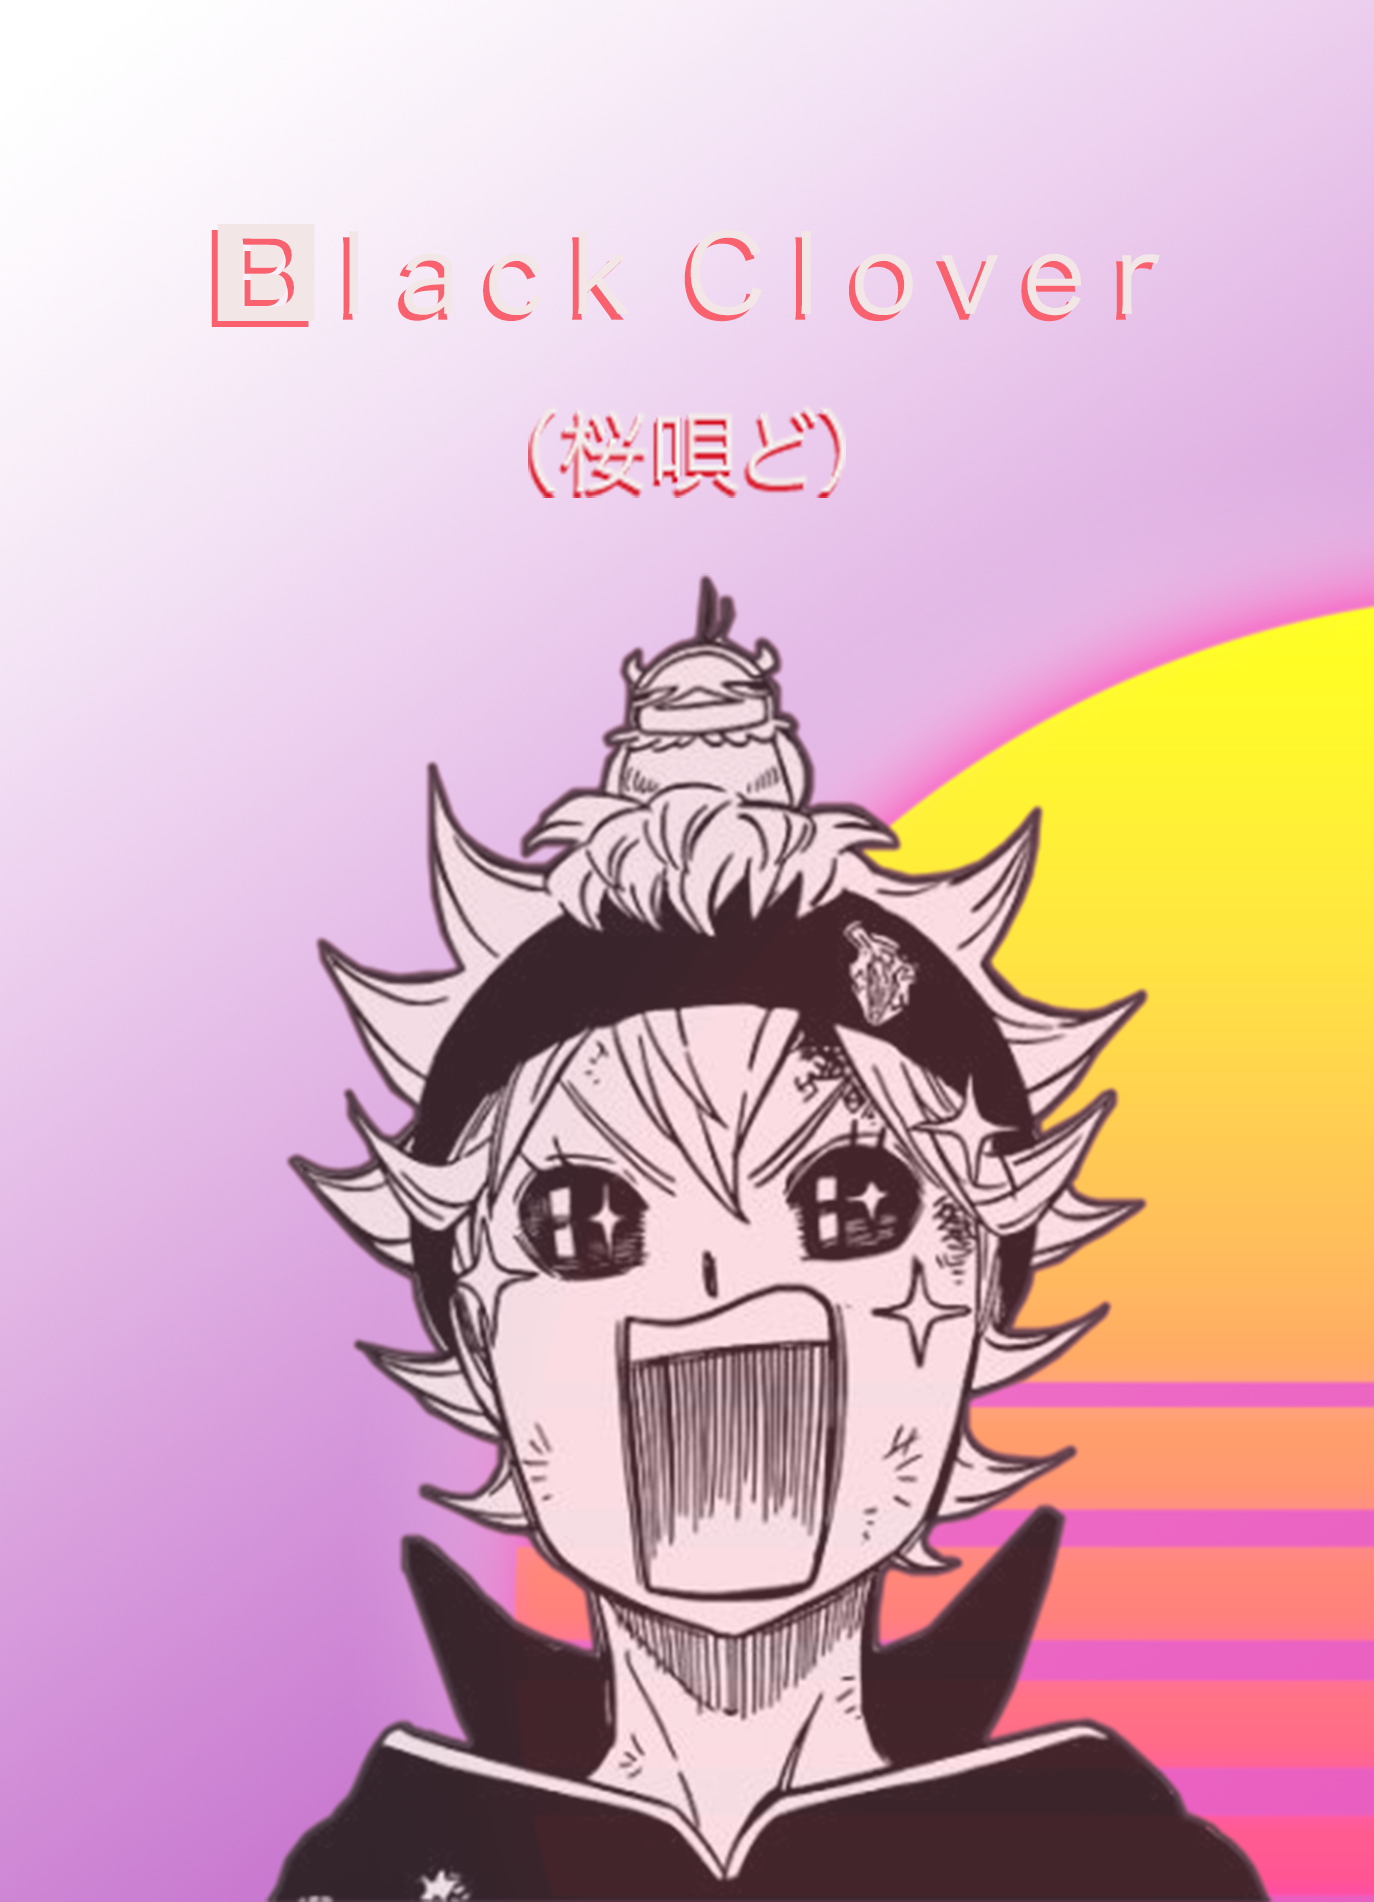 I made a new lock screen for my phone of the loudest boy